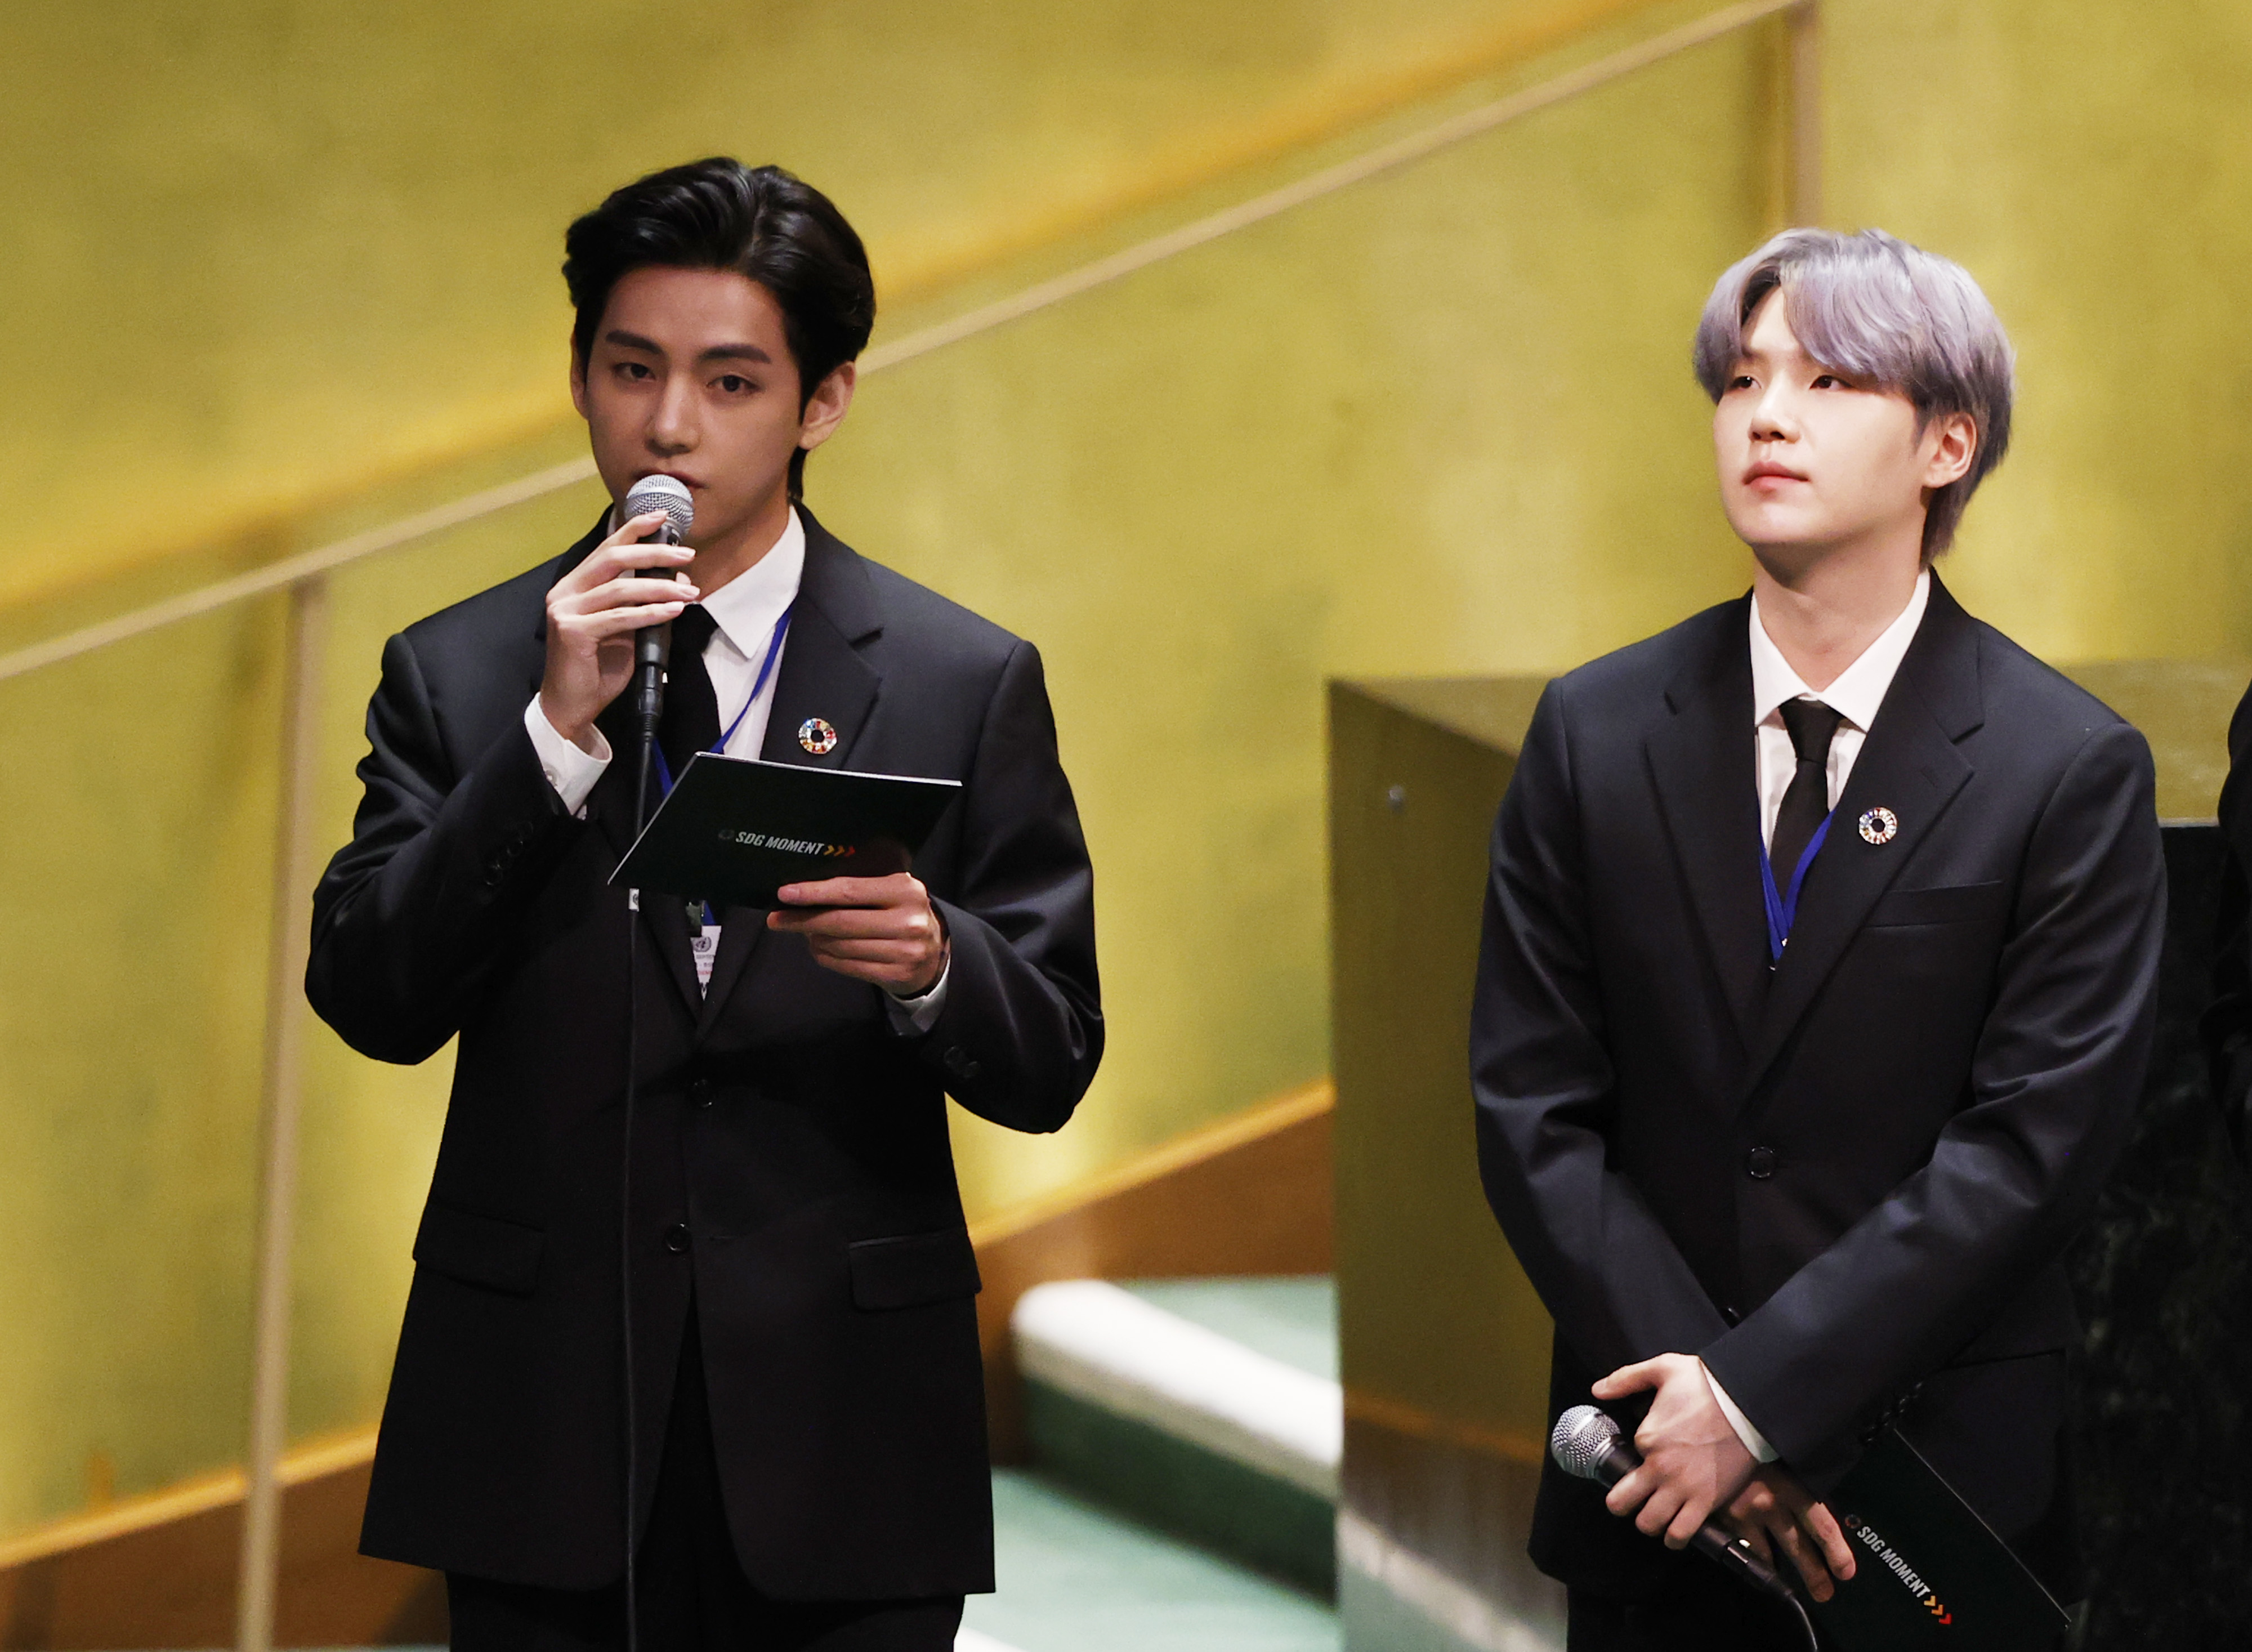 Suga listens as Taehyung/V of South Korean boy band BTS speaks at the SDG Moment event as part of the UN General Assembly 76th session